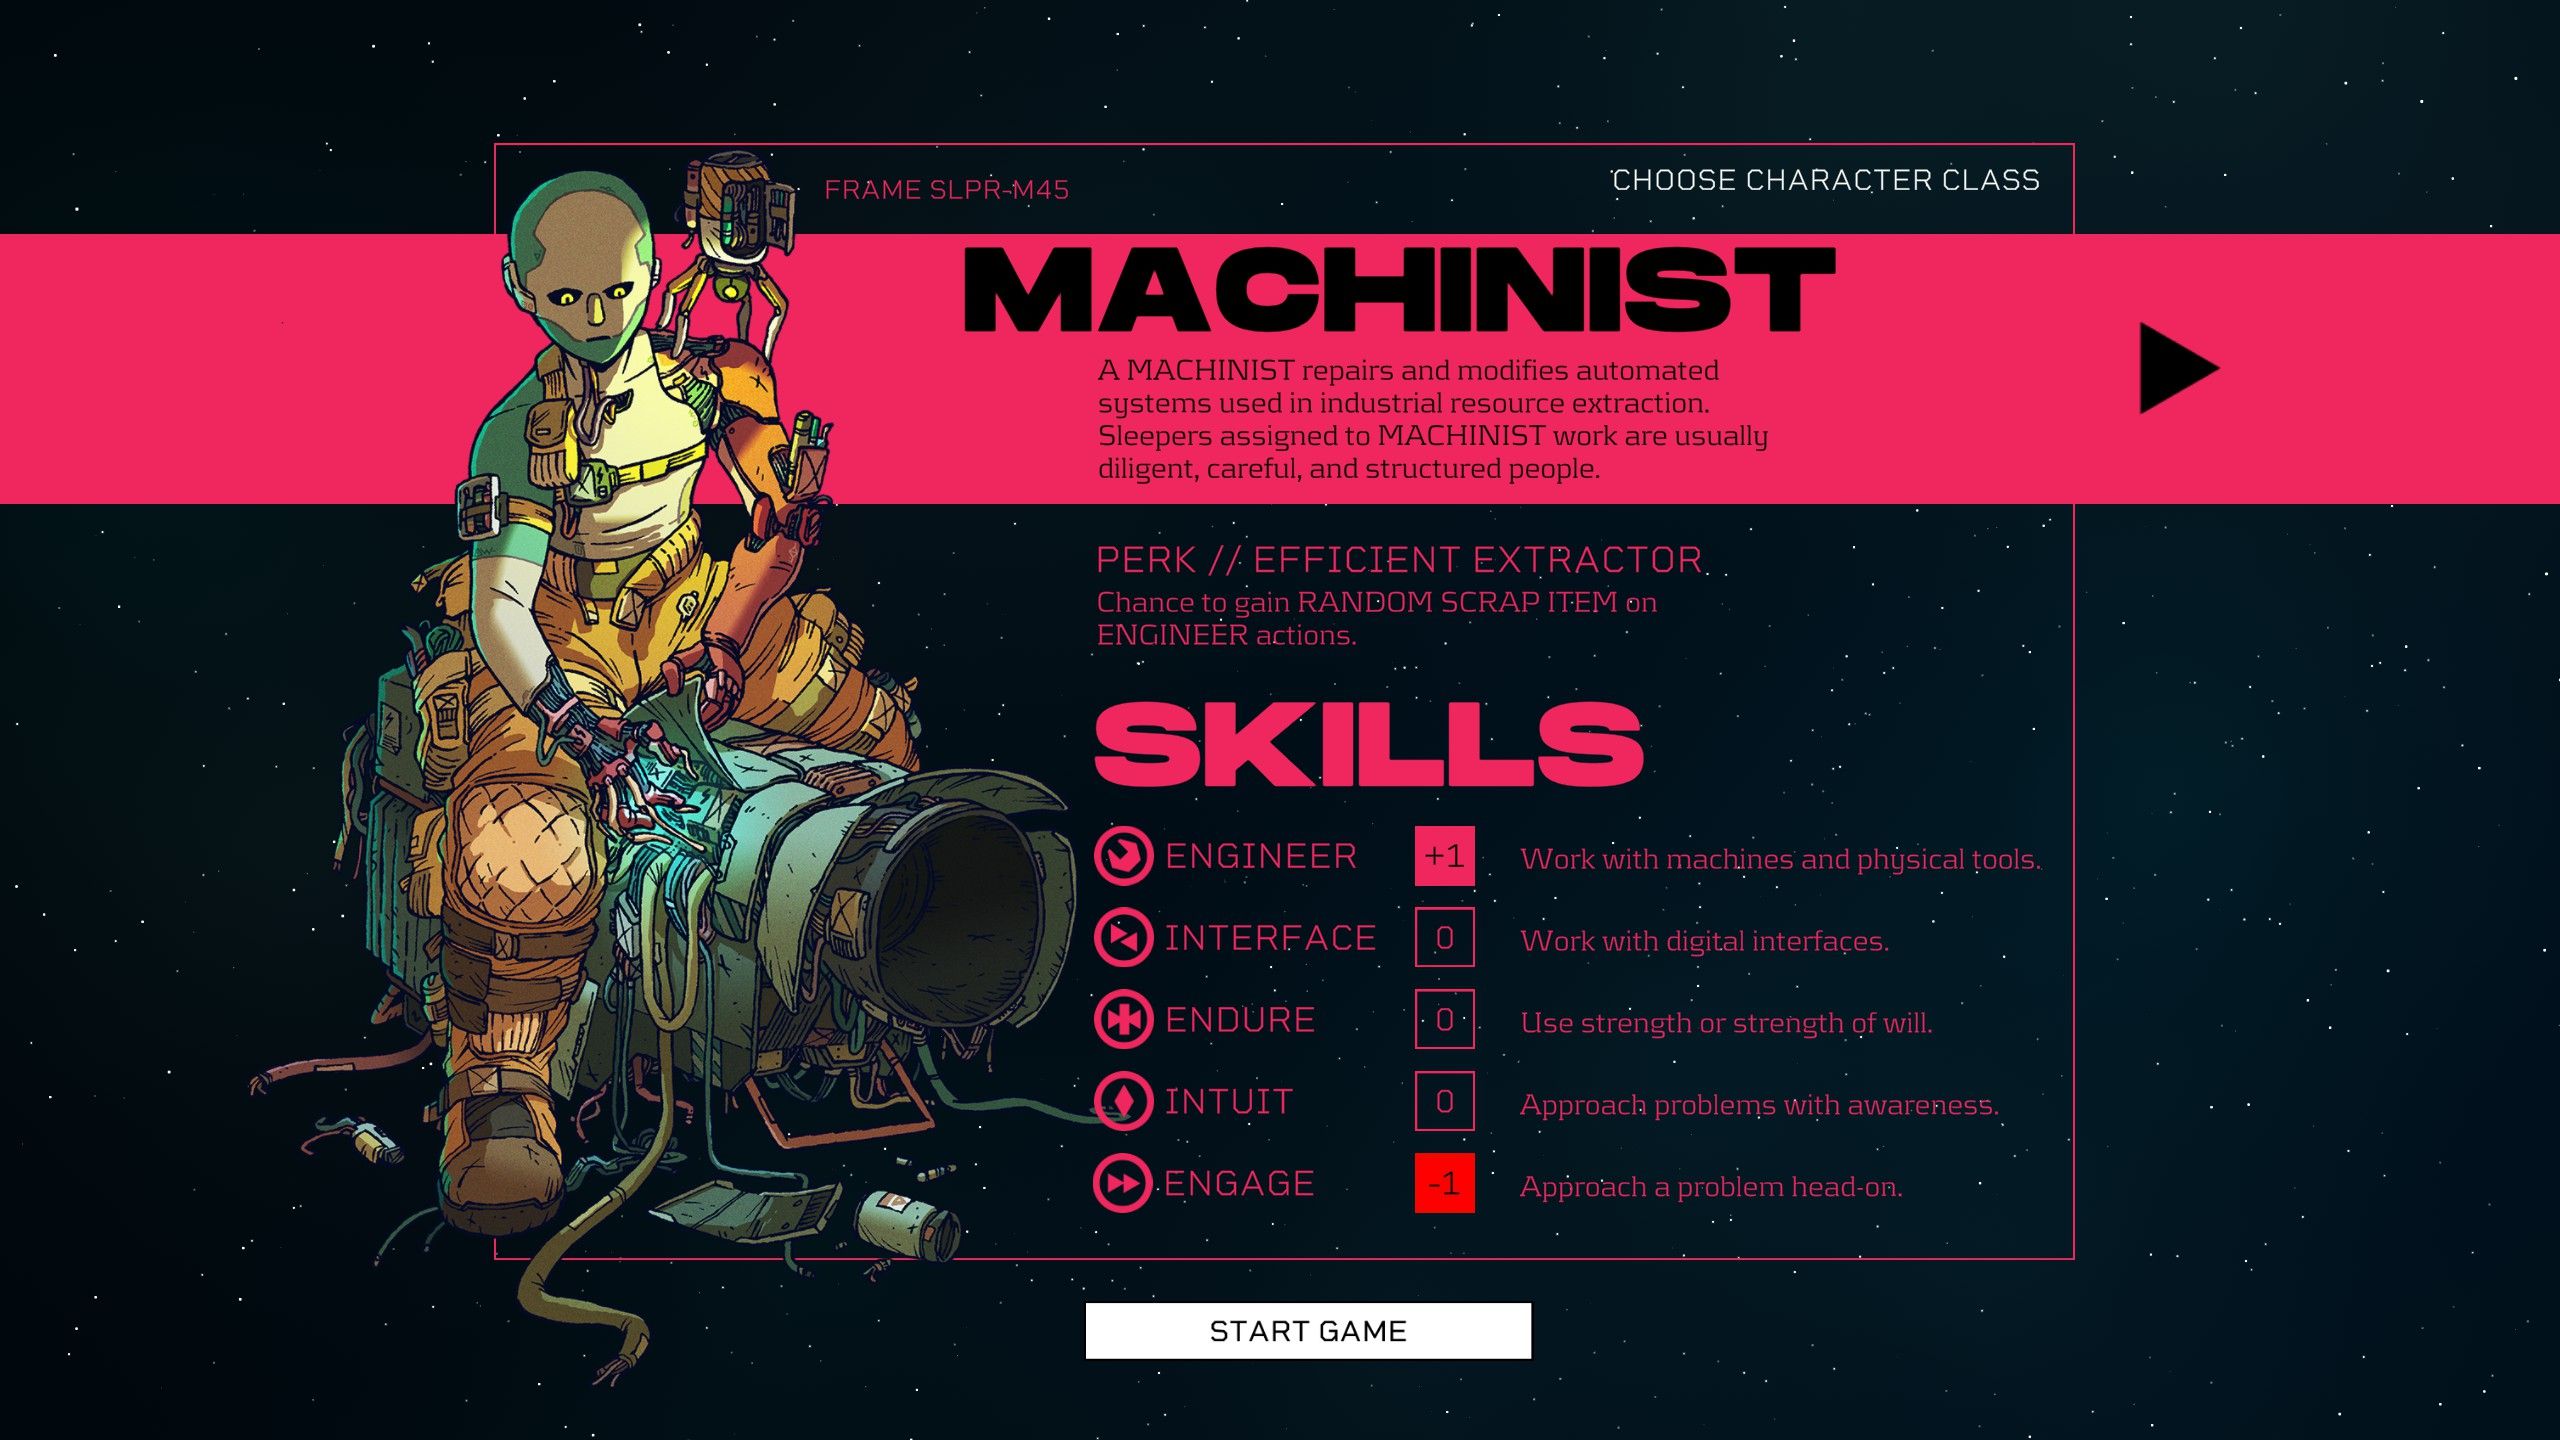 The character selection screen for the Machinist class in Citizen Sleeper